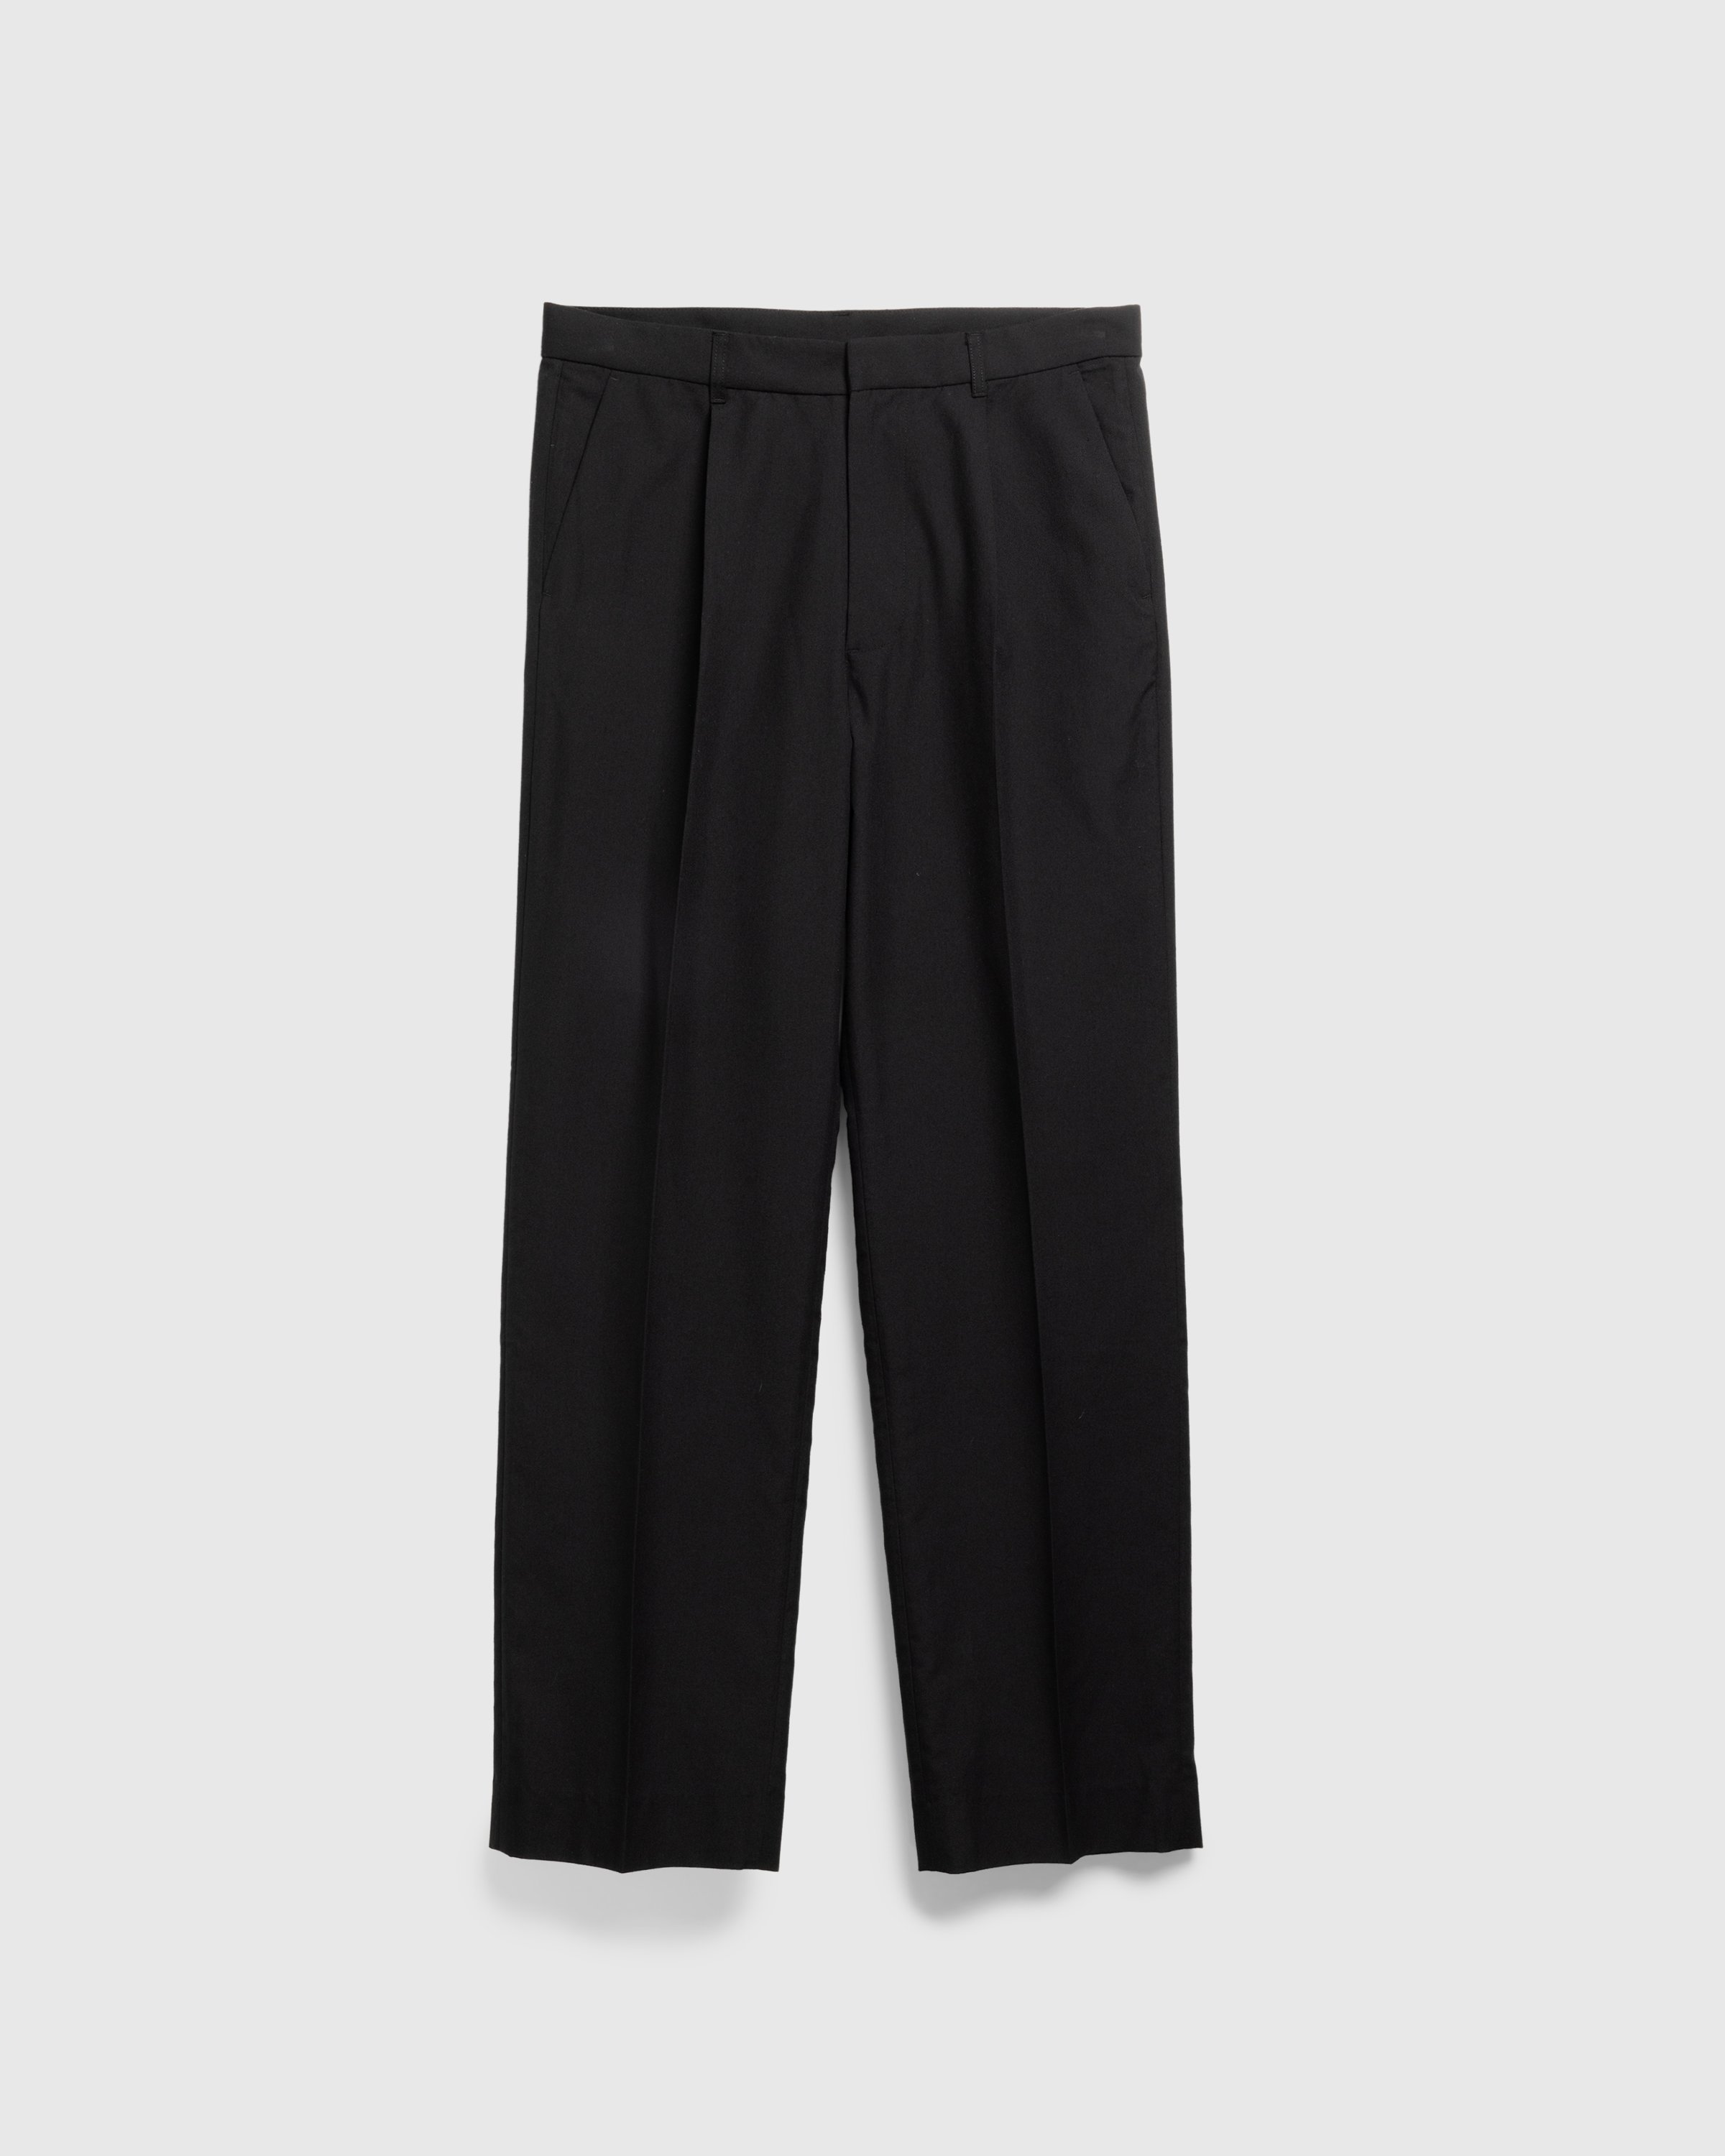 Highsnobiety HS05 - Tropical Suiting Pants - Clothing - Black - Image 1